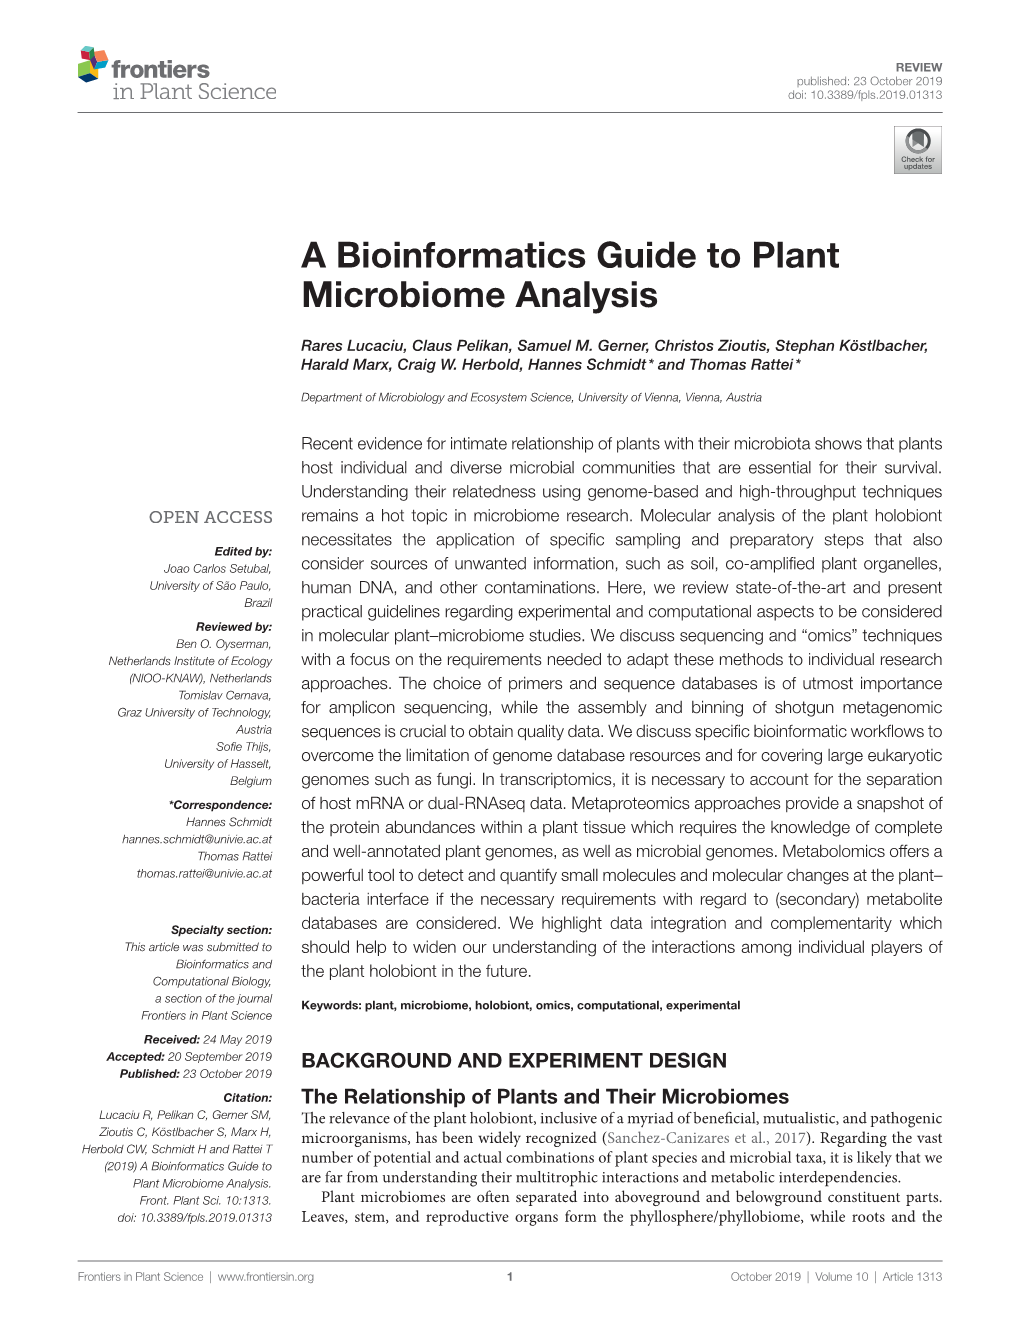 A Bioinformatics Guide to Plant Microbiome Analysis